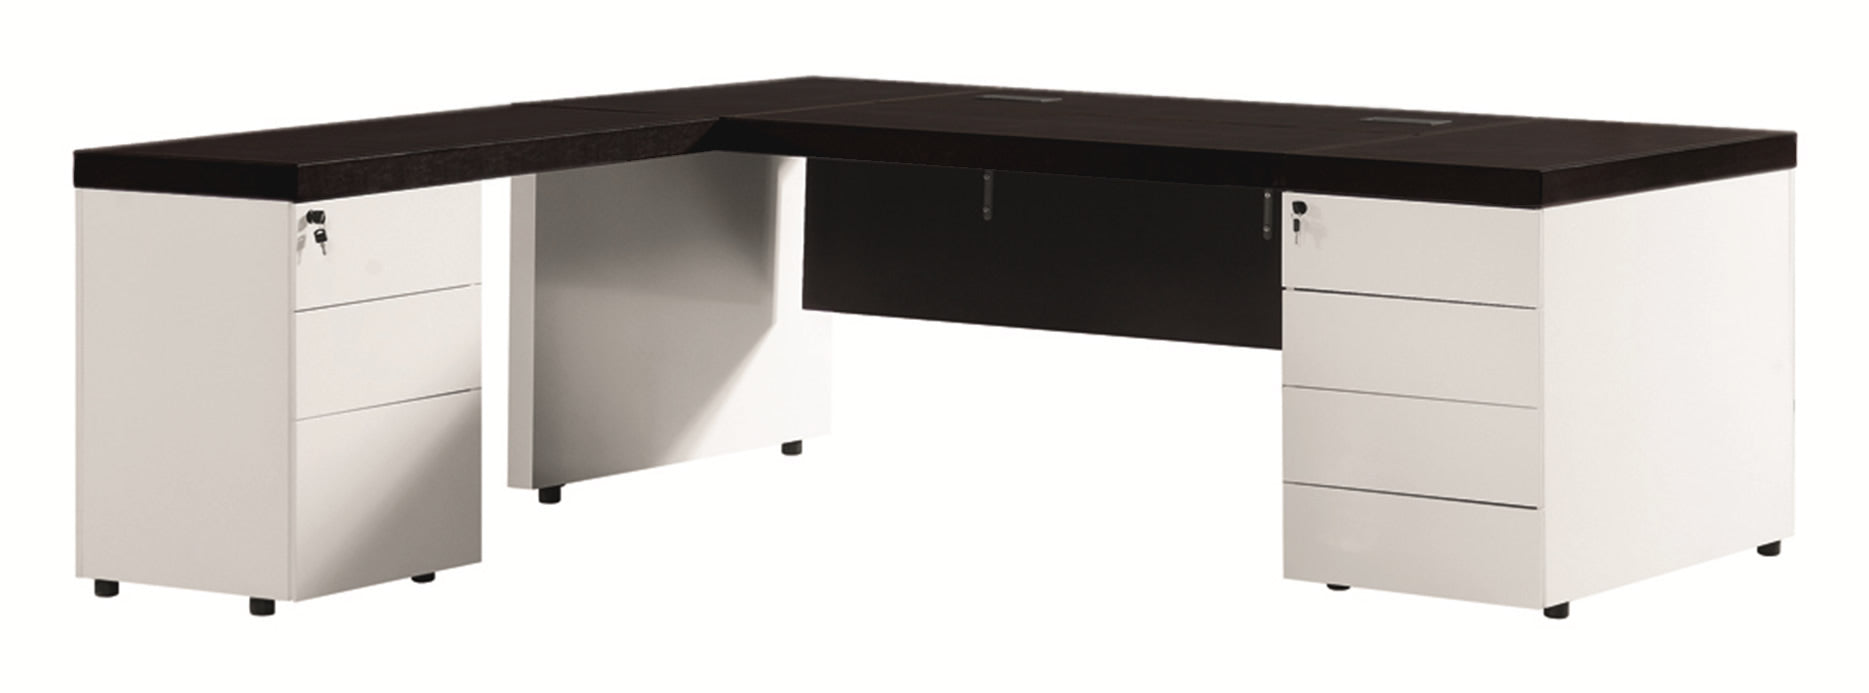 White High Gloss L Shape Executive Desk with Black Bonded Leather Top - T1361-2000mm North Yorkshire